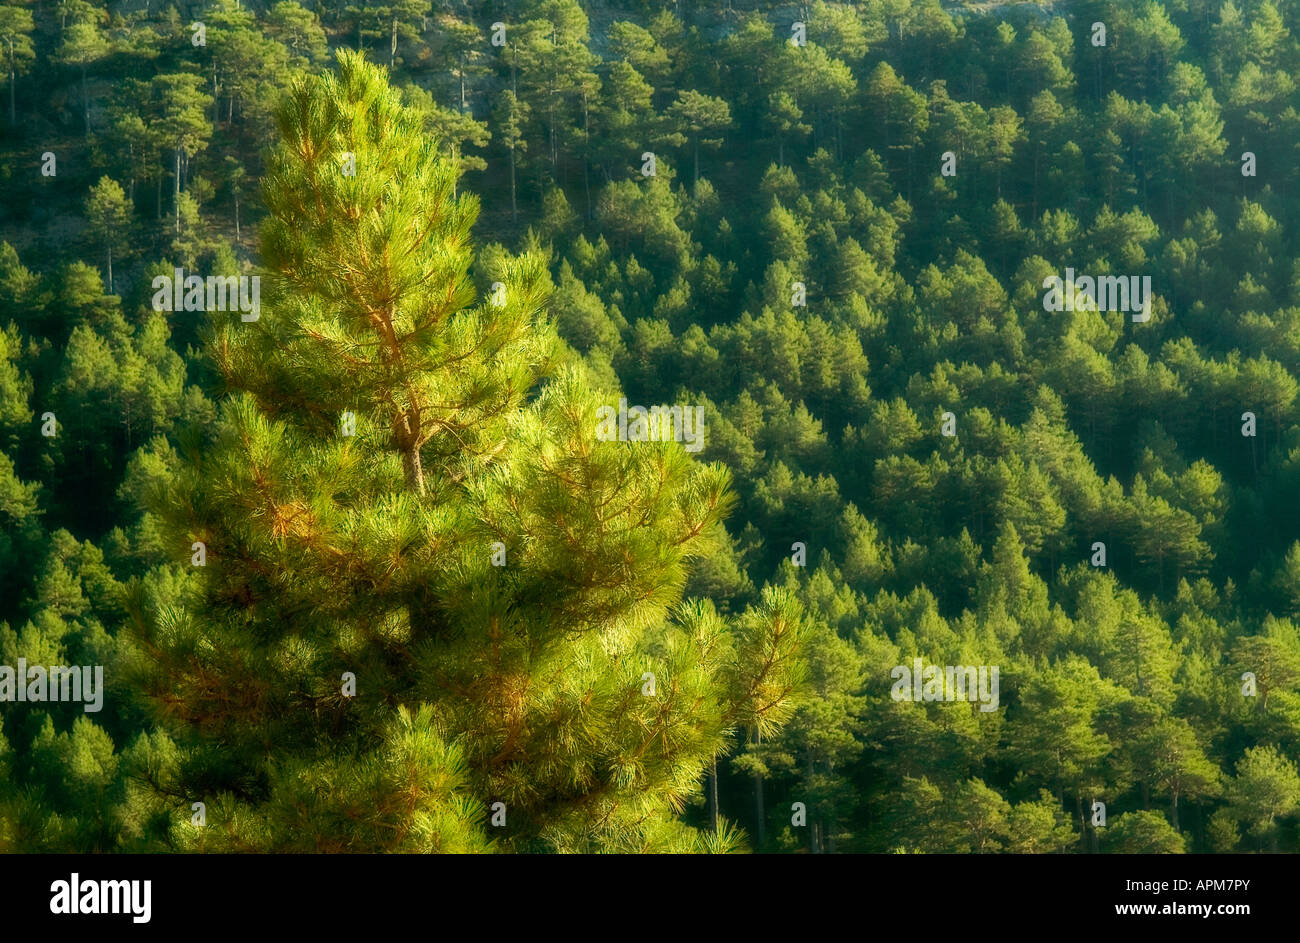 Pine tree forest. Gudar - Javalambre country. Teruel province. Spain Stock Photo